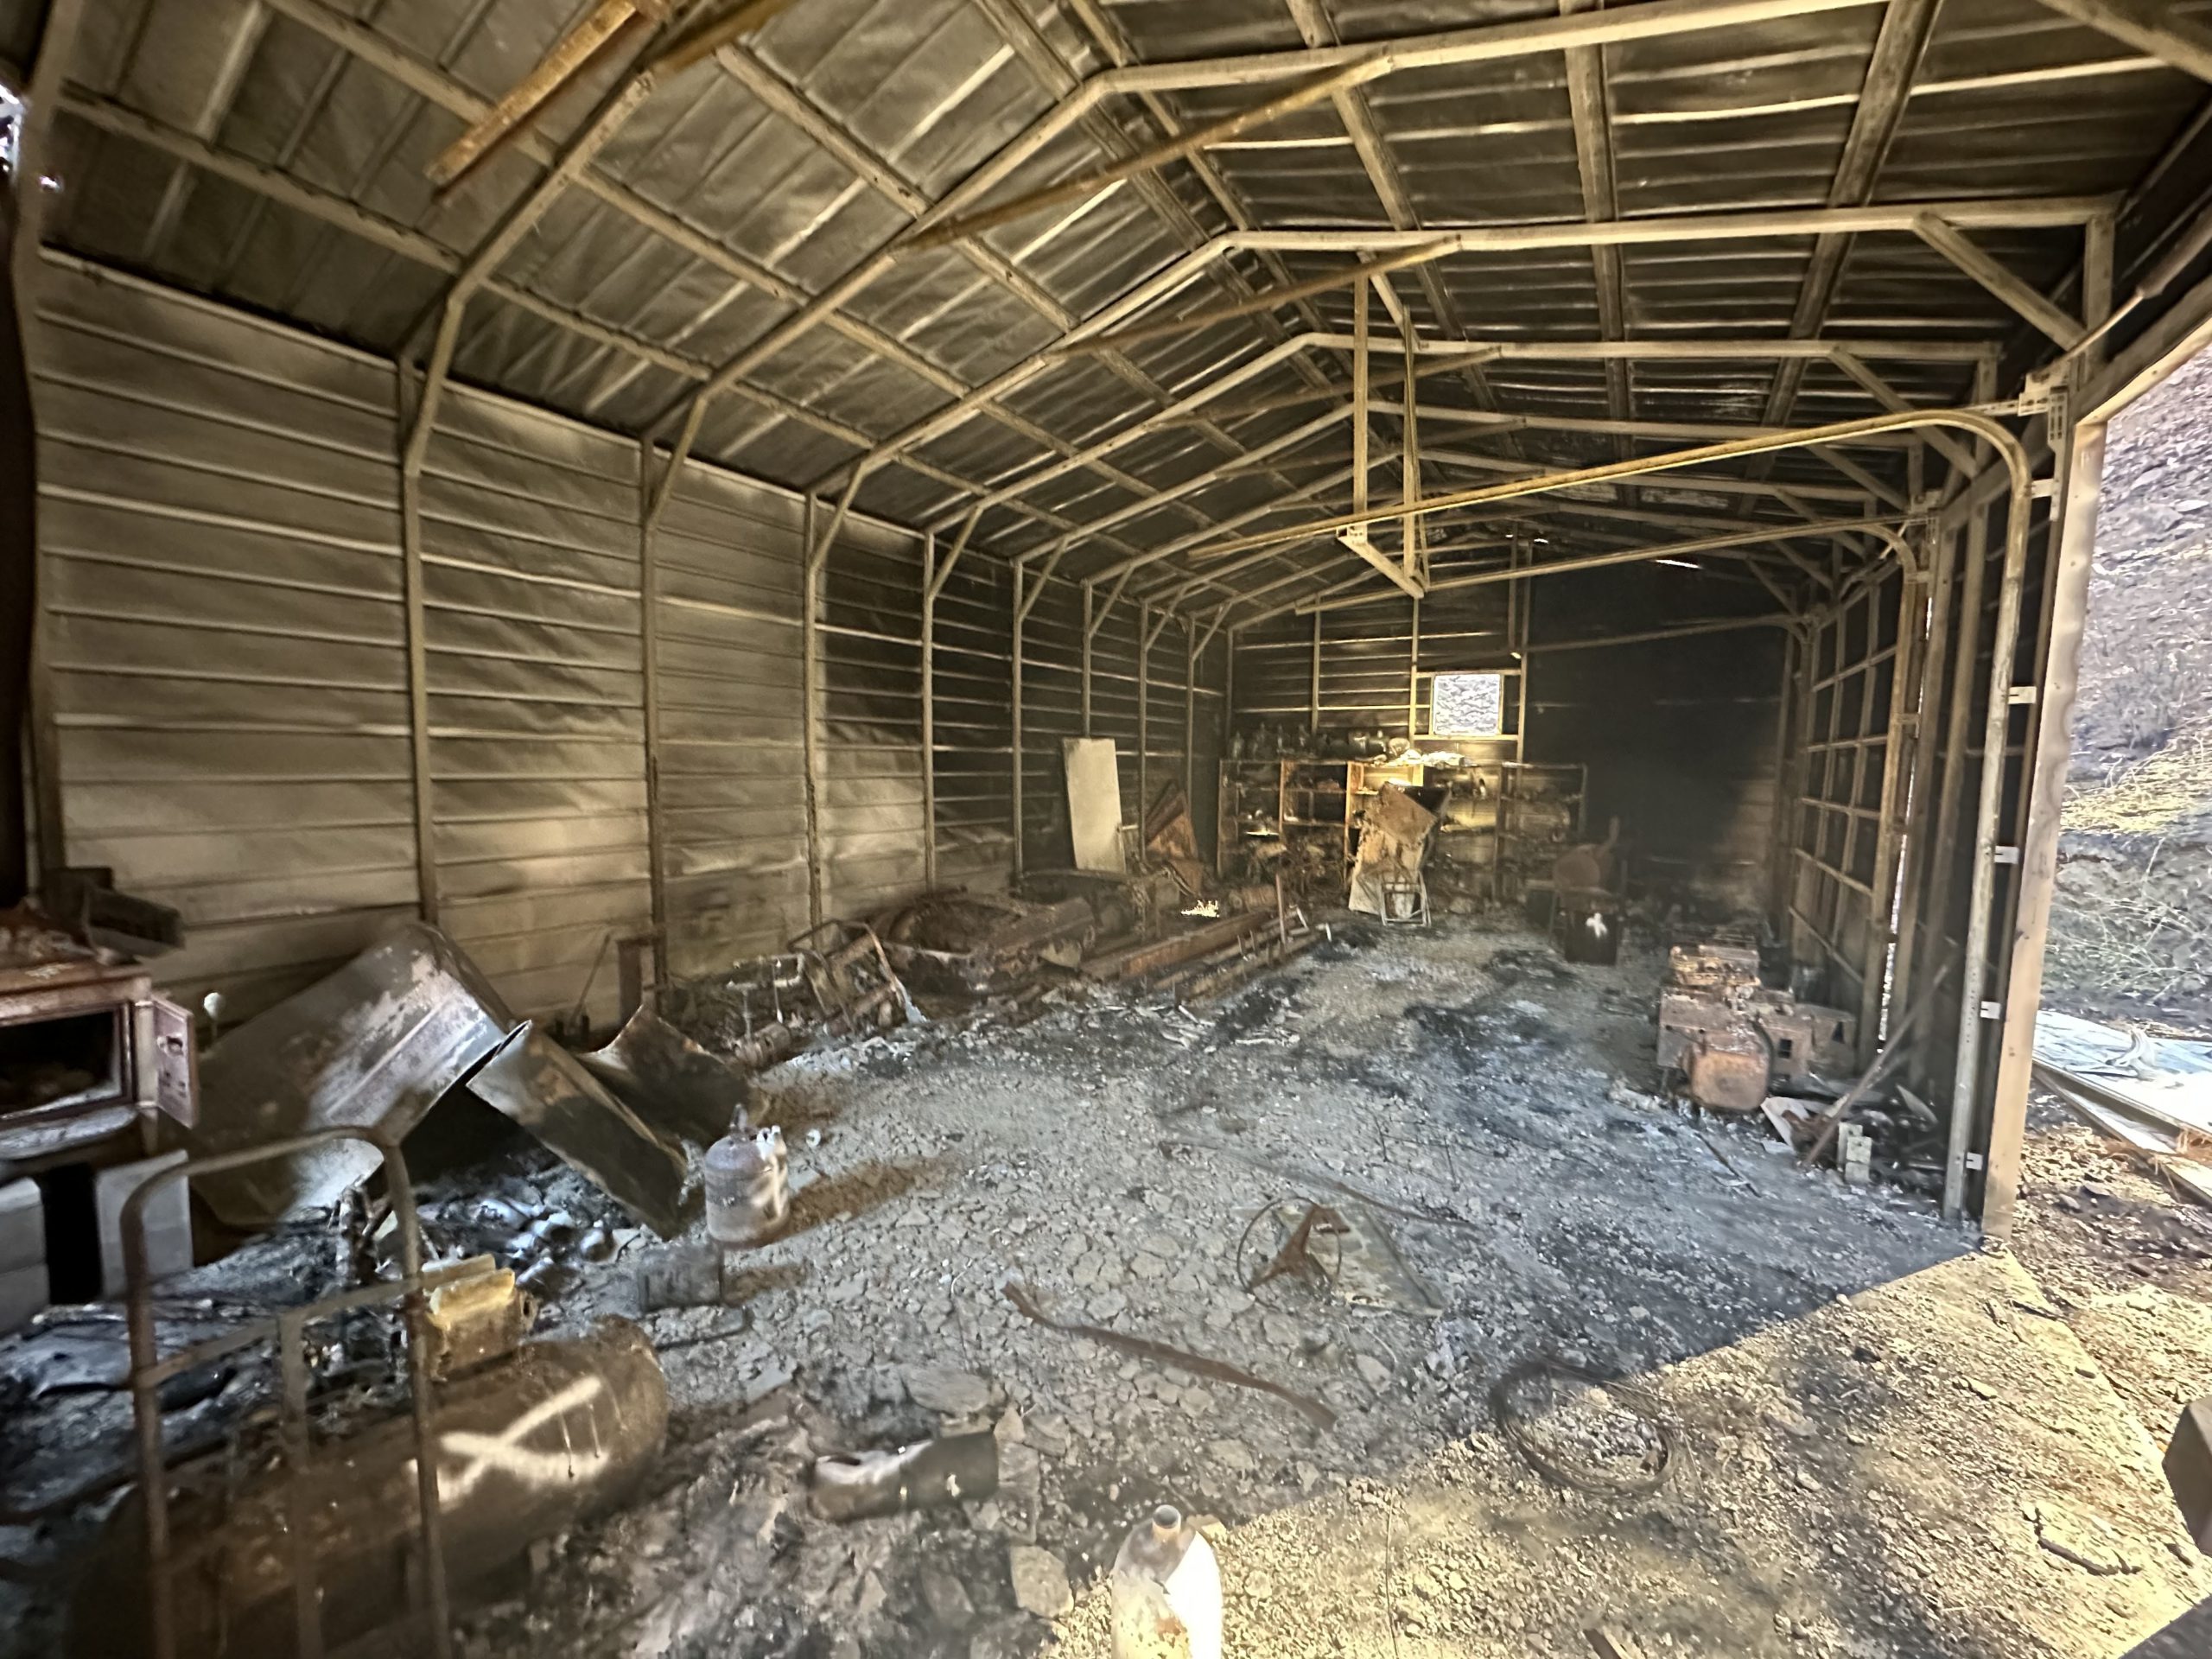 Inside a metal structure where a wildfire occurred.